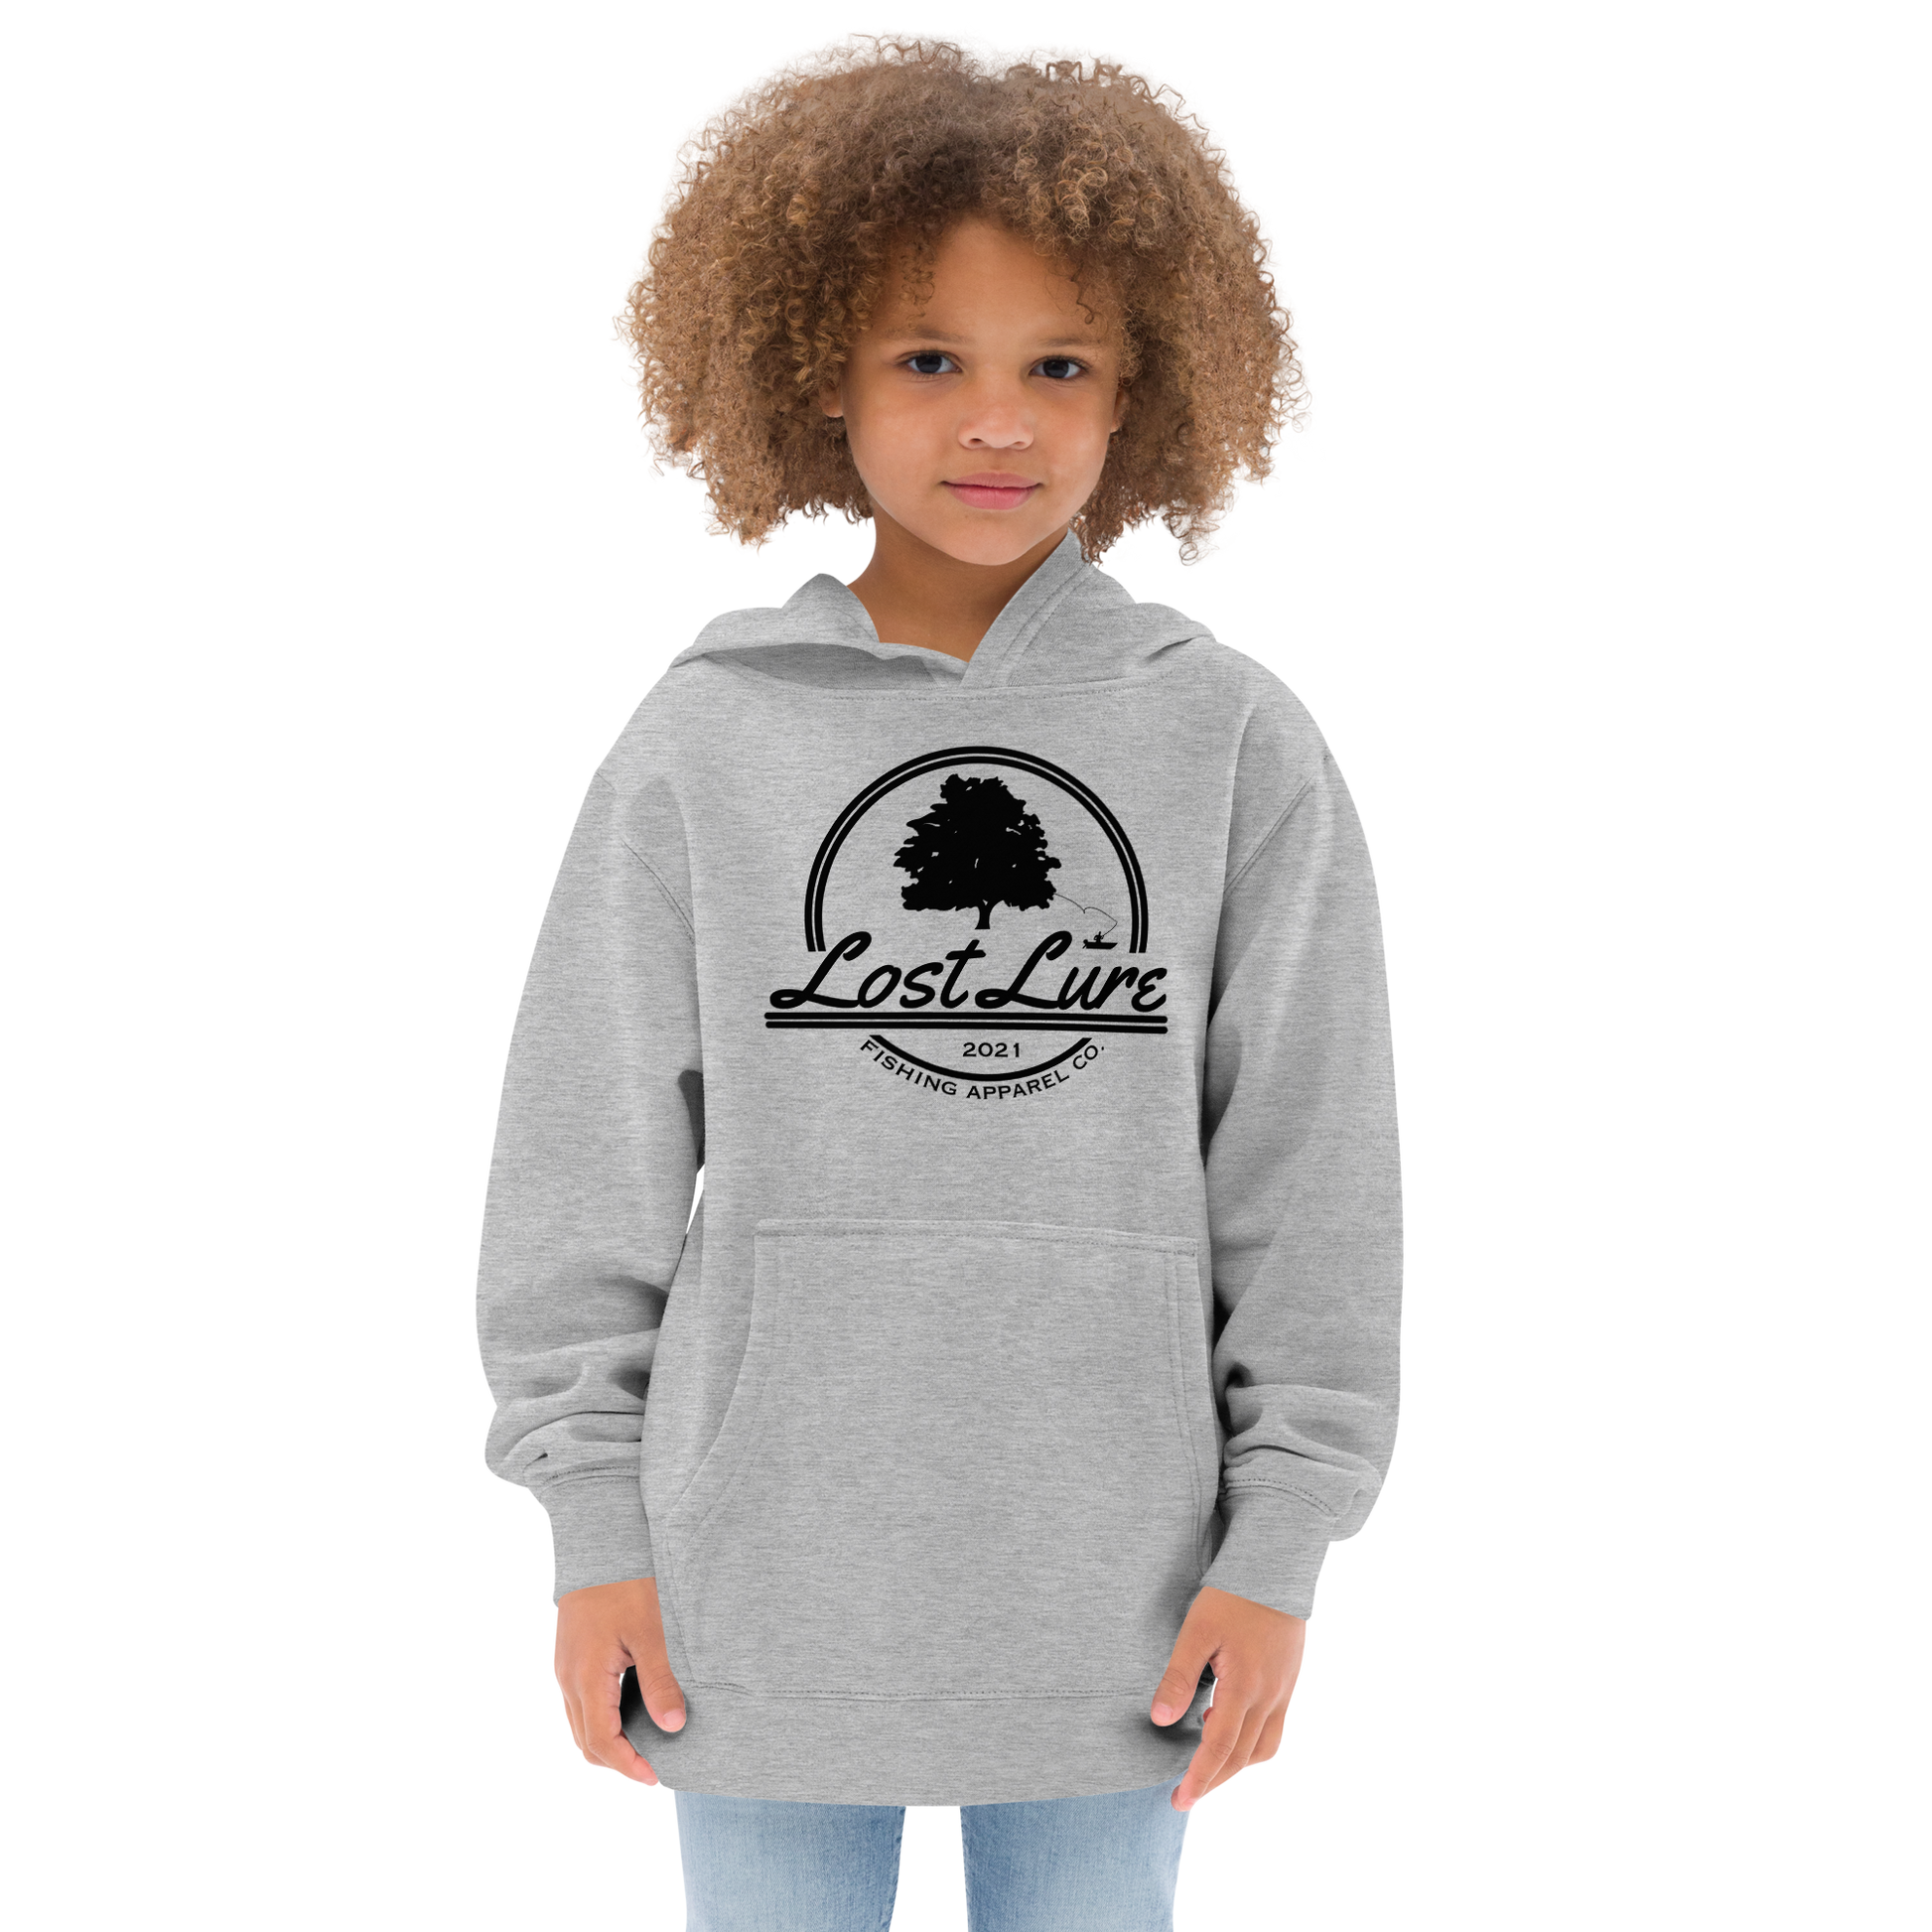 Girl wearing grey Kids size fishing hoodie with lost lure logo.